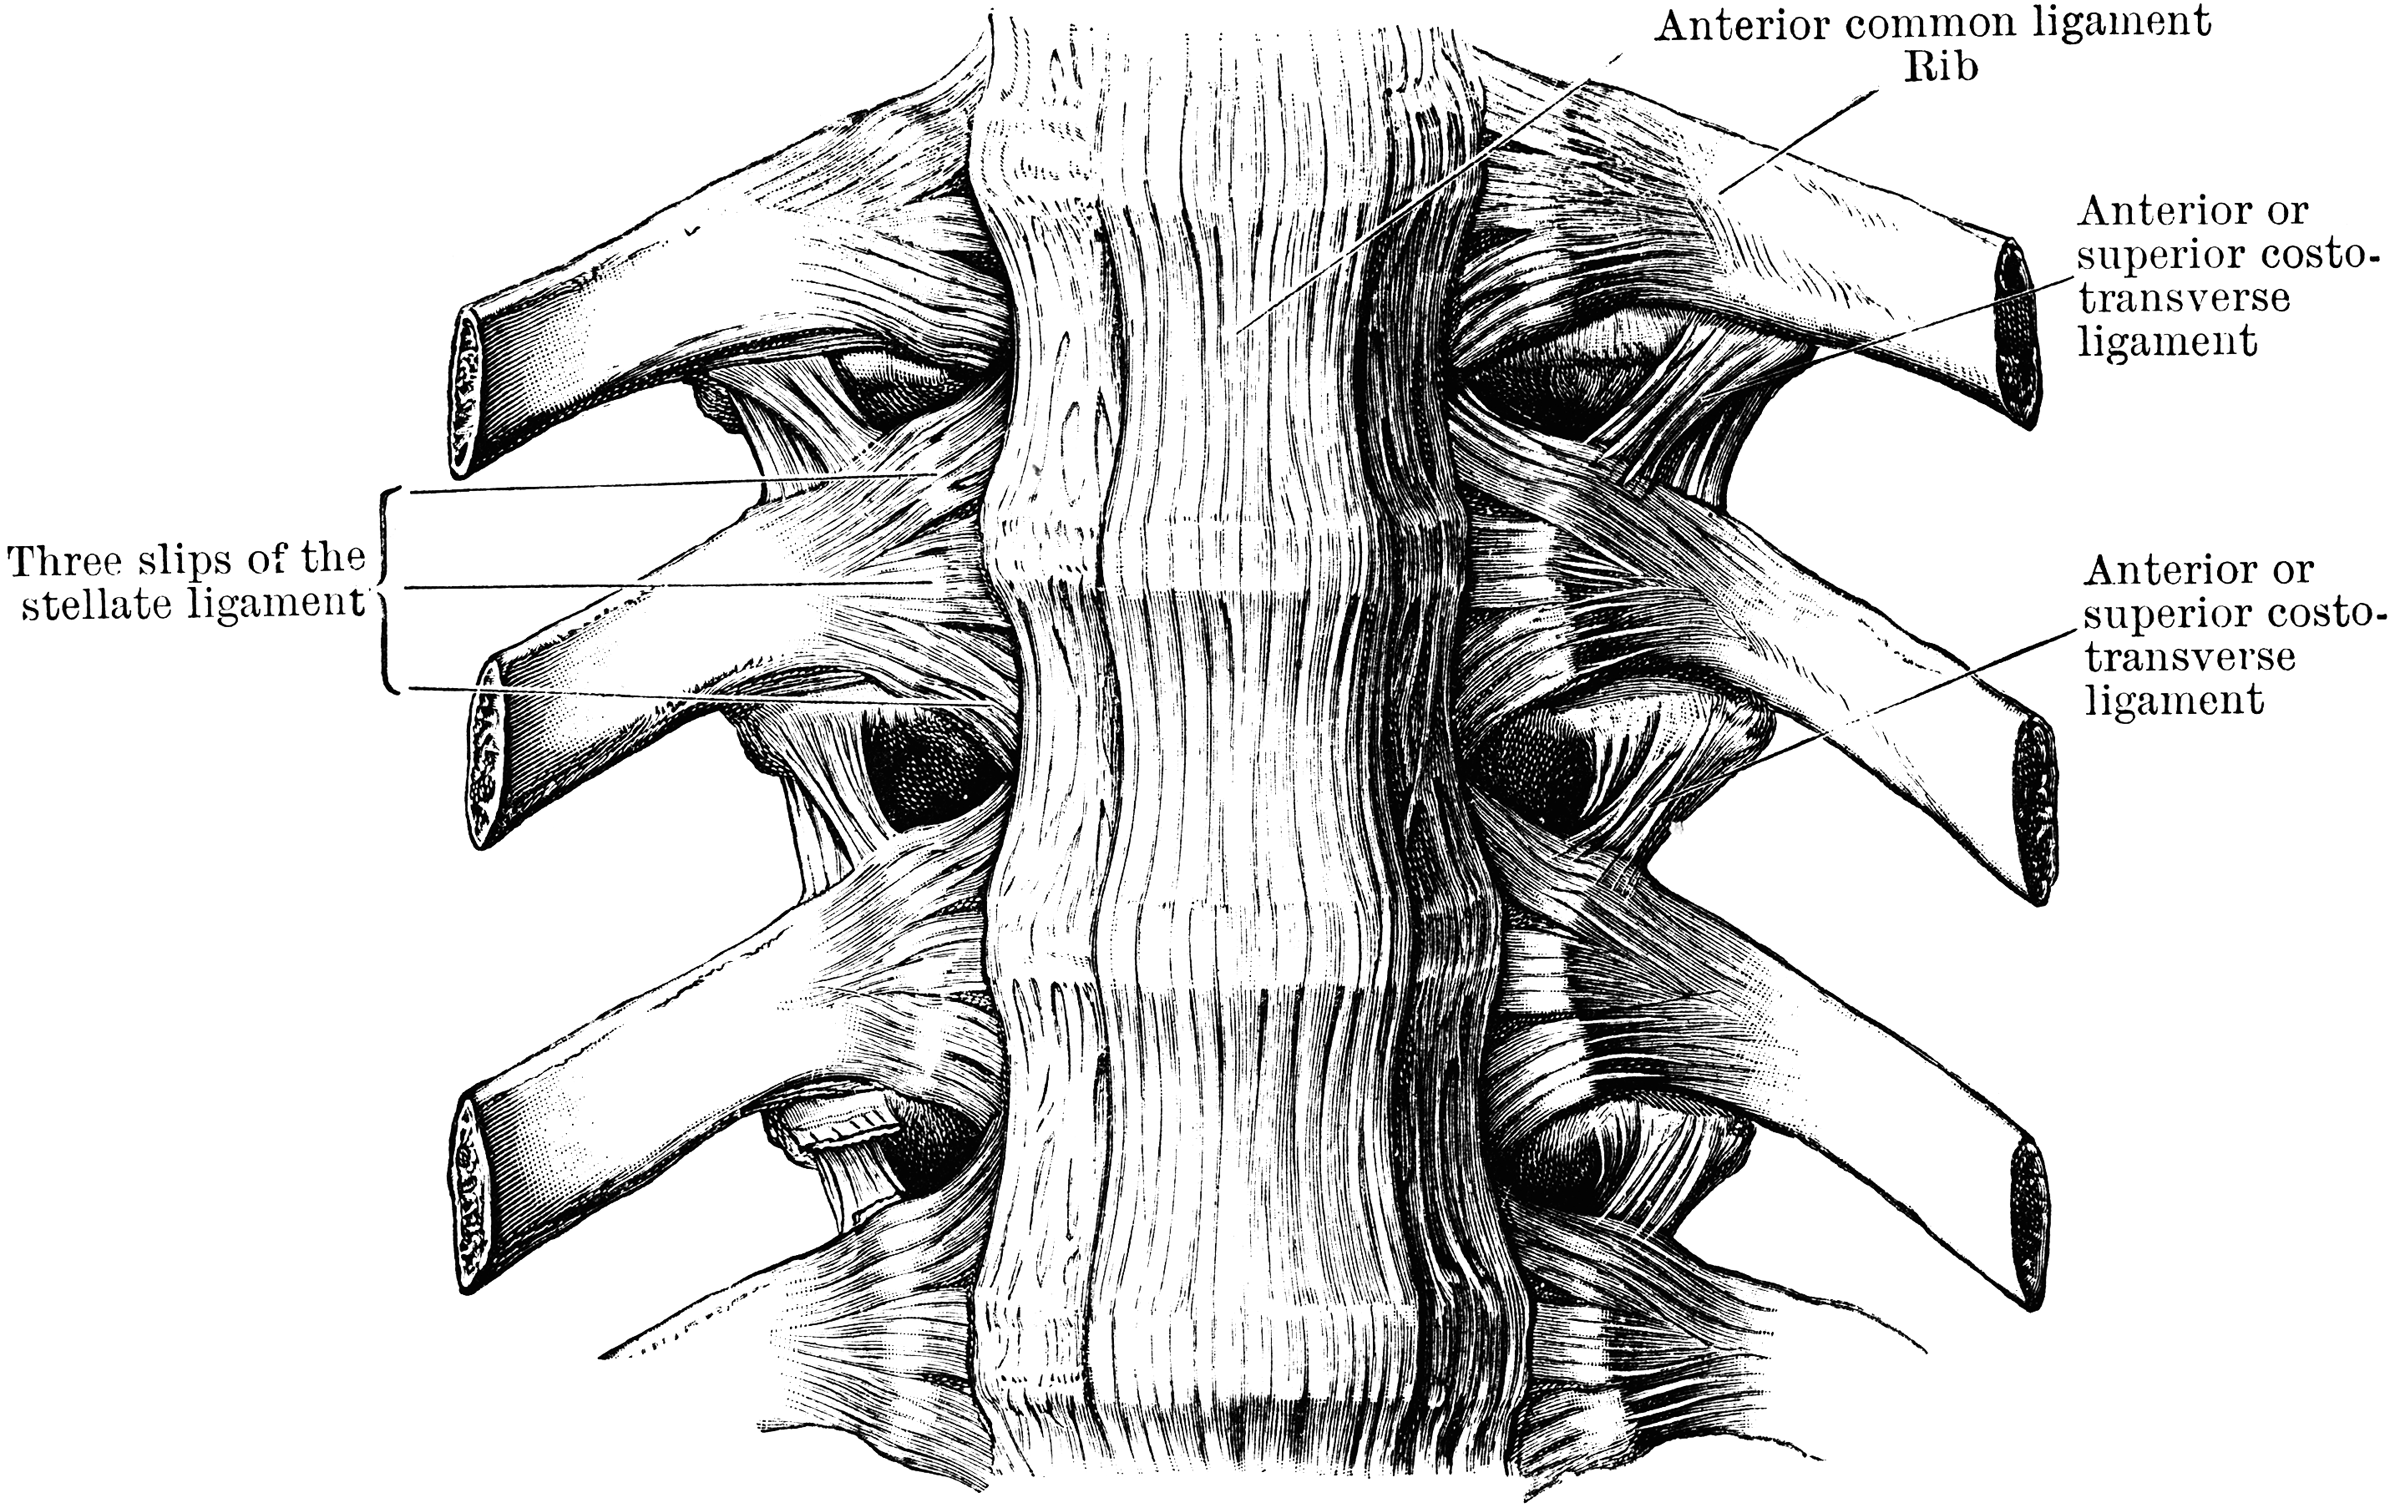 Ligaments of the Spine | ClipArt ETC